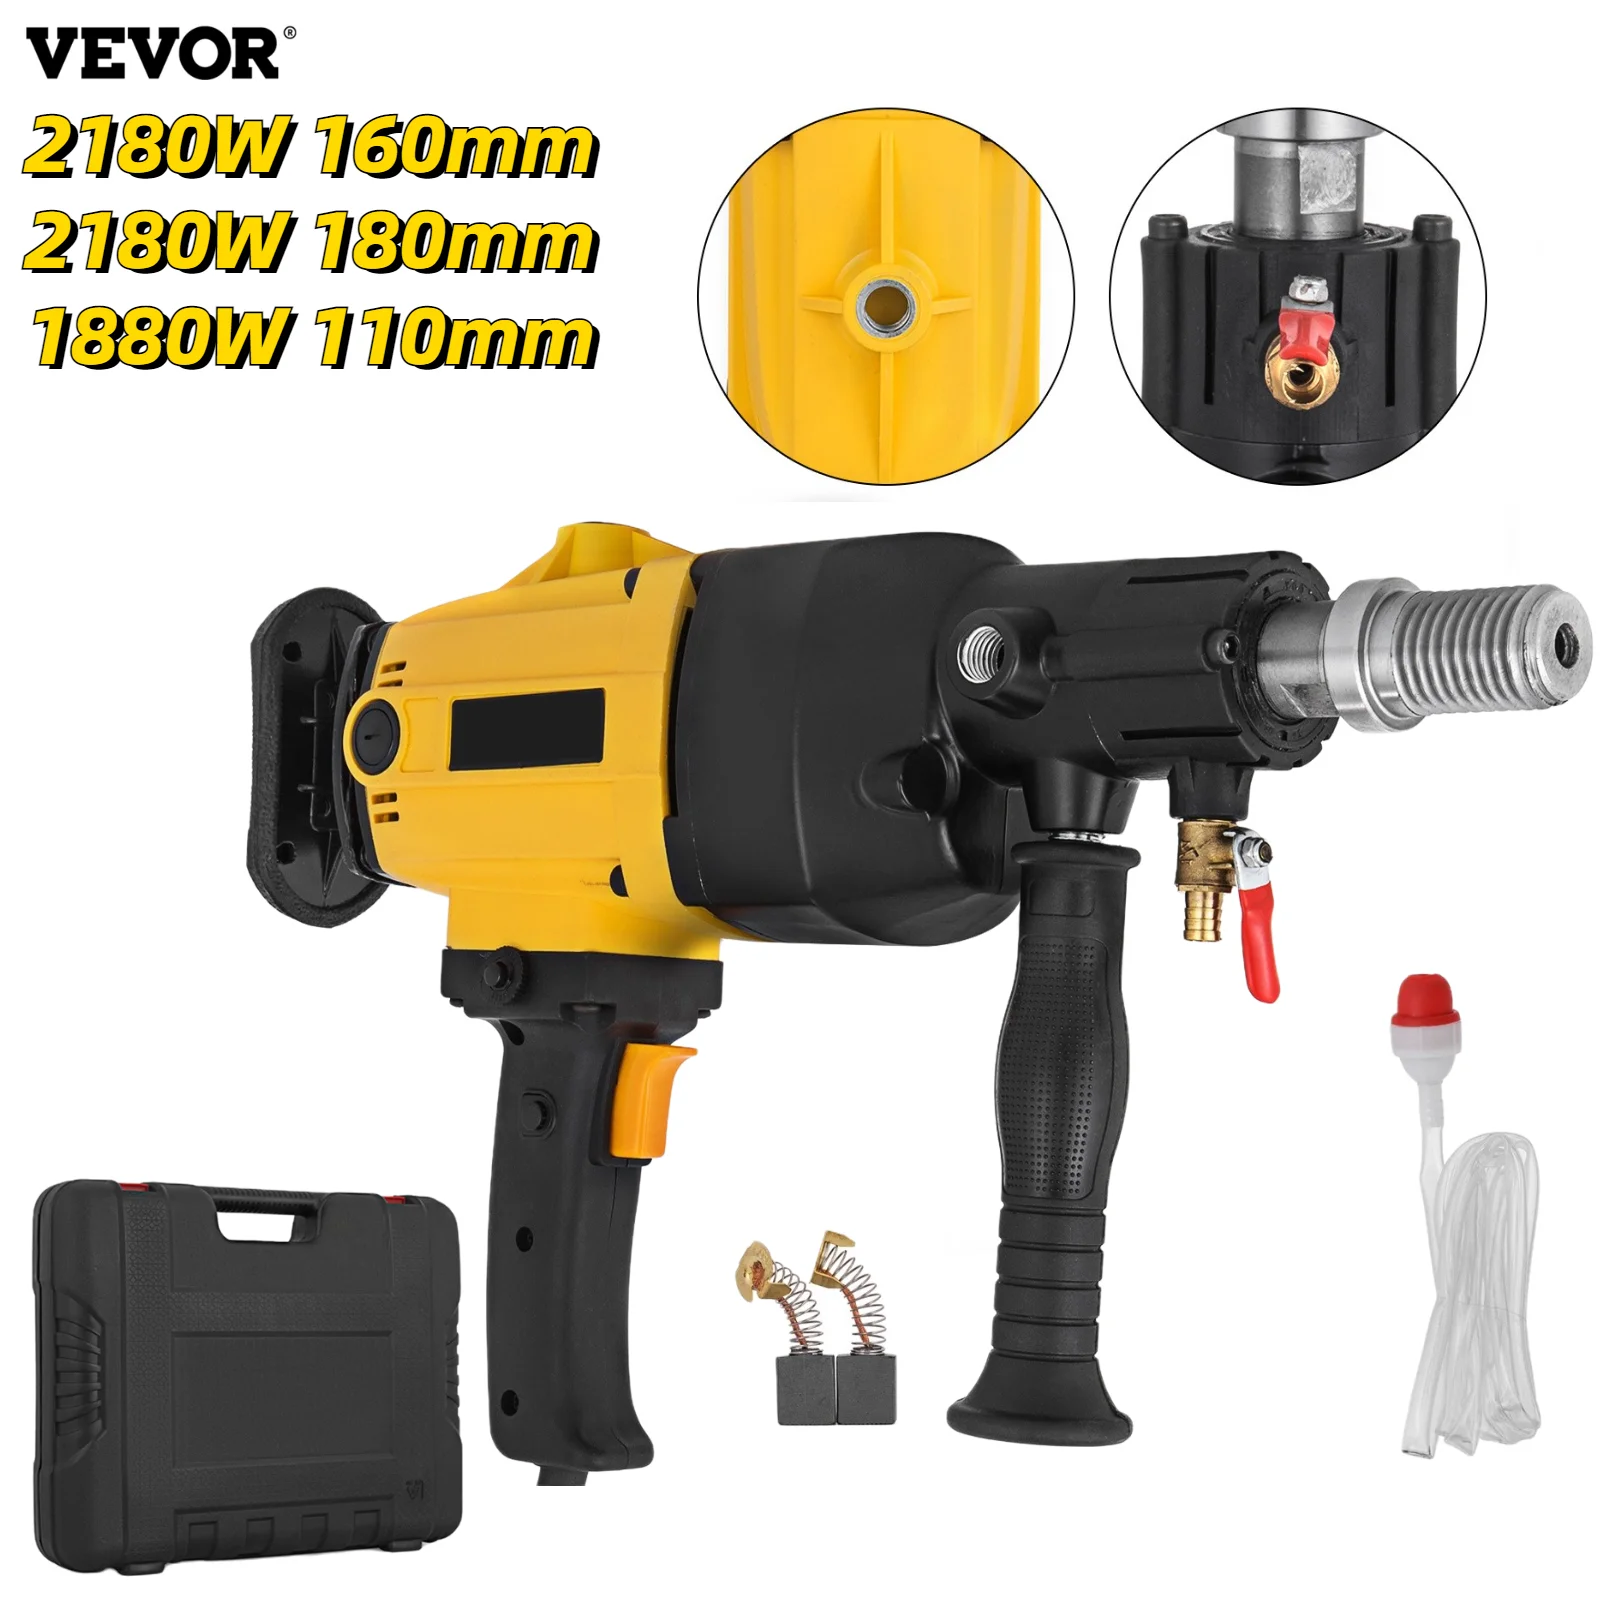 

VEVOR Handheld Diamond Core Drill Rig Concrete 110mm 160mm 180mm Wet / Dry Electric Stepless Speed Drilling Machine 1880W 2180W